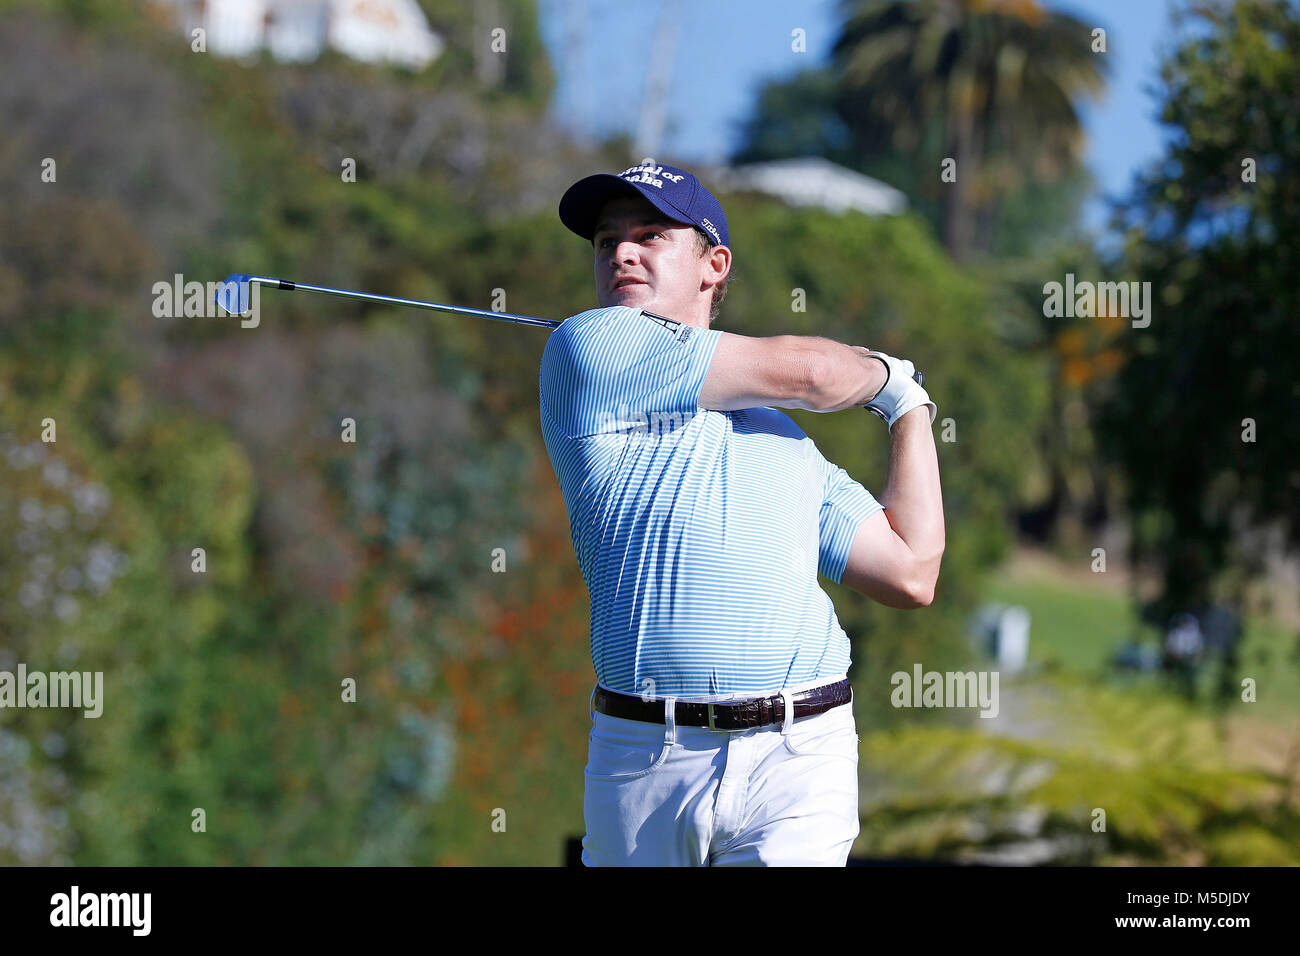 February 18, 2018 Bud Cauley hits a tee shot on the fourth hole during the final round of the Genesis Open golf tournament at the Riviera Country Club in Pacific Palisades, CA. Charles Baus/CSM Stock Photo